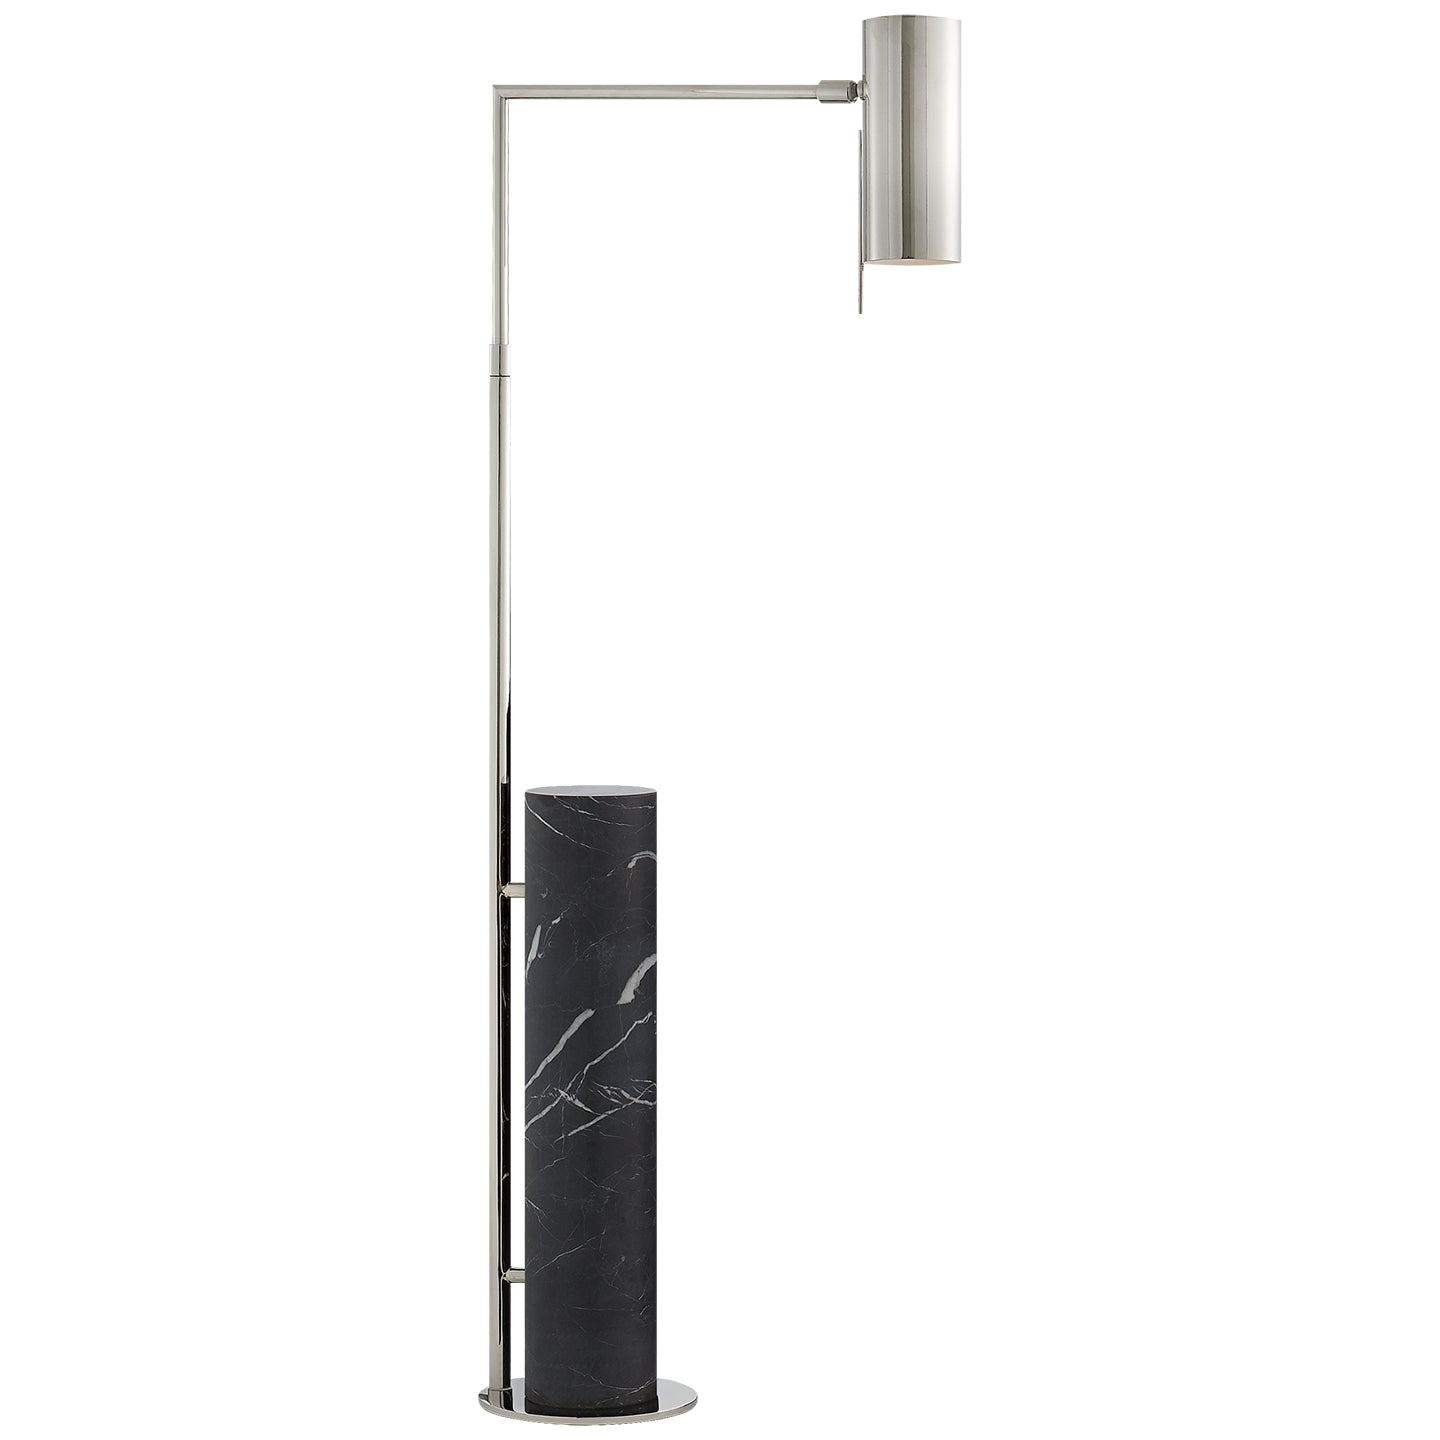 Load image into Gallery viewer, Visual Comfort Signature - KW 1611PN/BM - LED Floor Lamp - Alma - Polished Nickel and Black Marble
